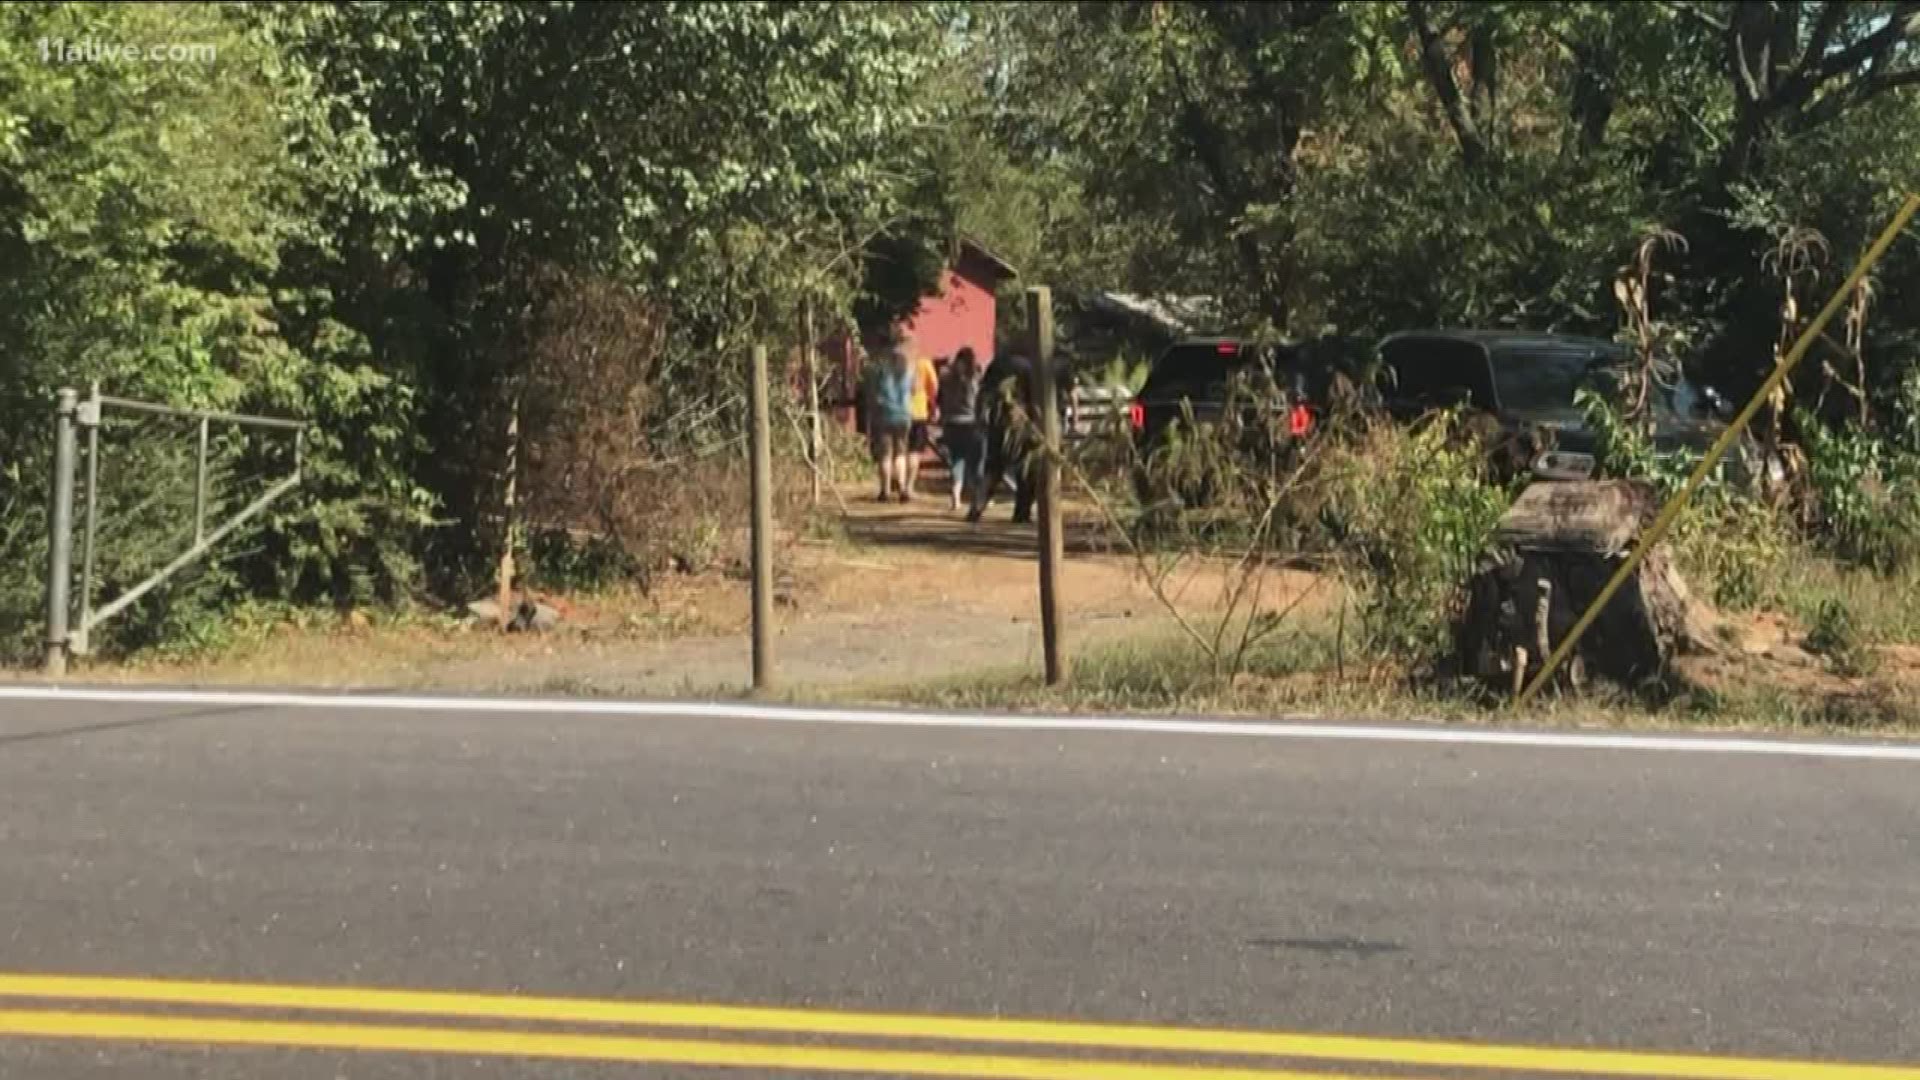 The body of Hannah Bender, a missing 21-year-old Lumpkin County woman, was found in a shallow grave in Forsyth County off Keith Bridge Road.